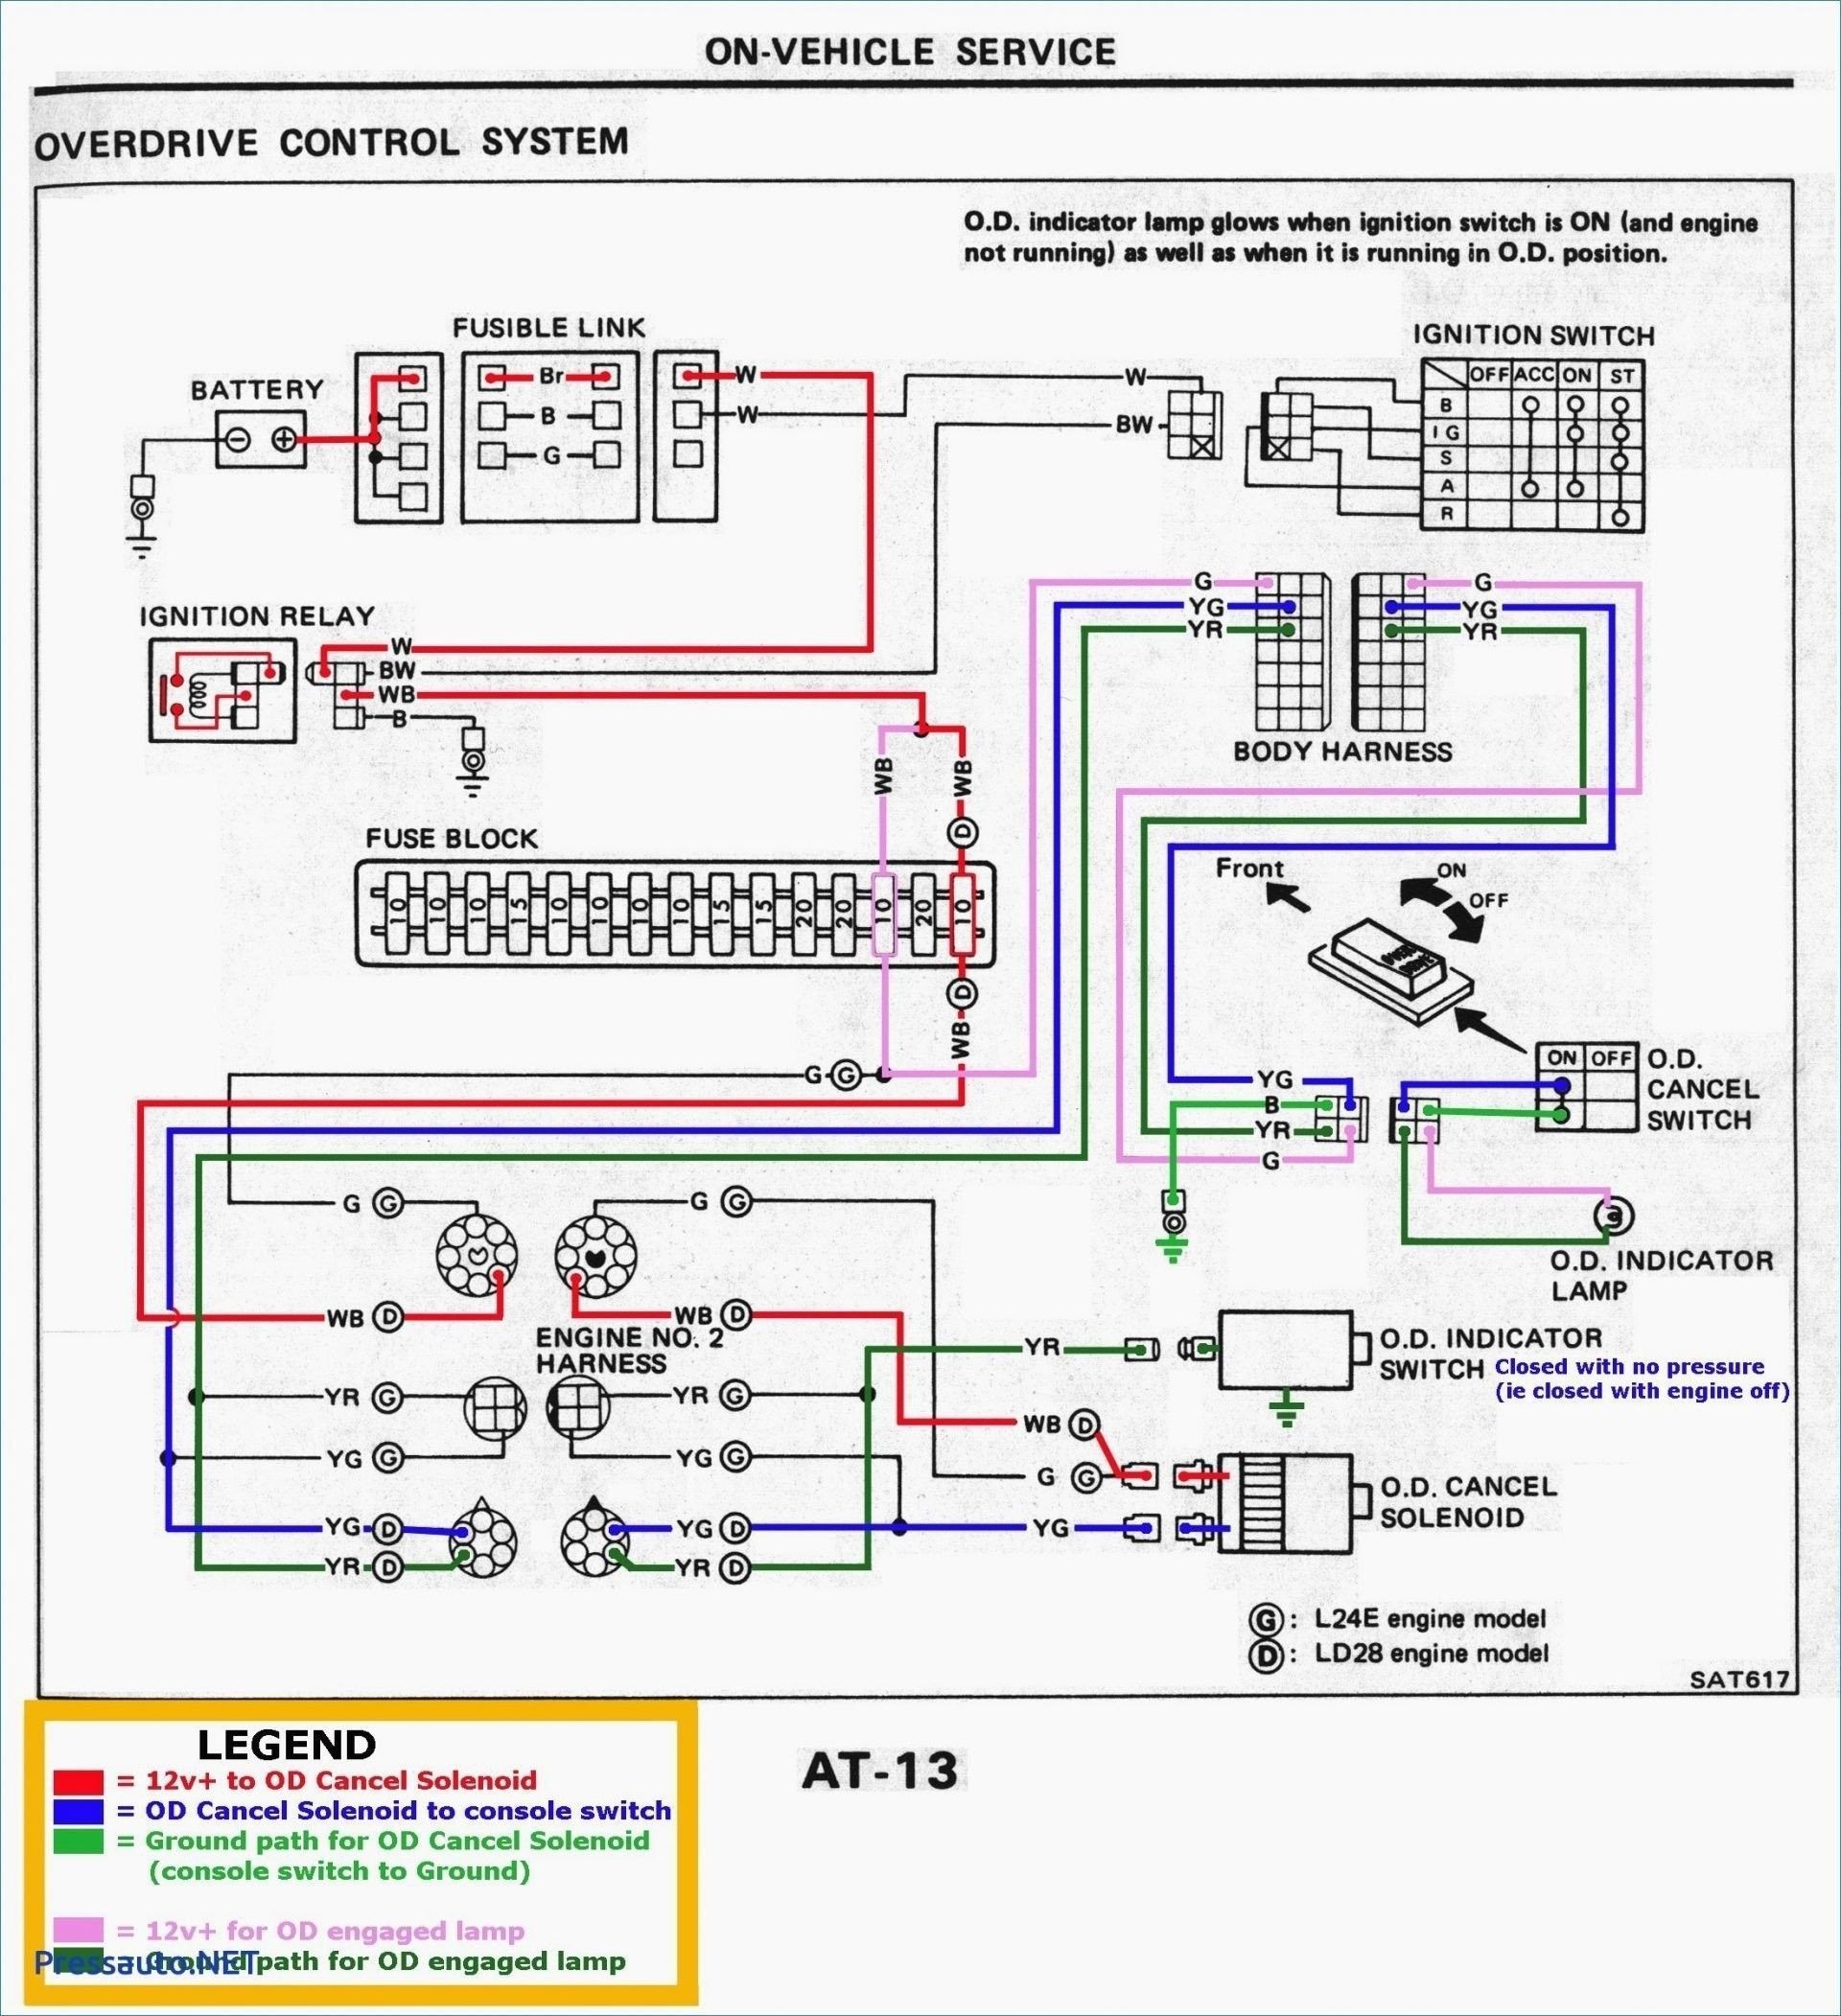 2005 Dodge Ram Stereo Wiring Diagrams Infinity New 2004 Dodge Ram 1500 Infinity Wiring Diagram Diagram